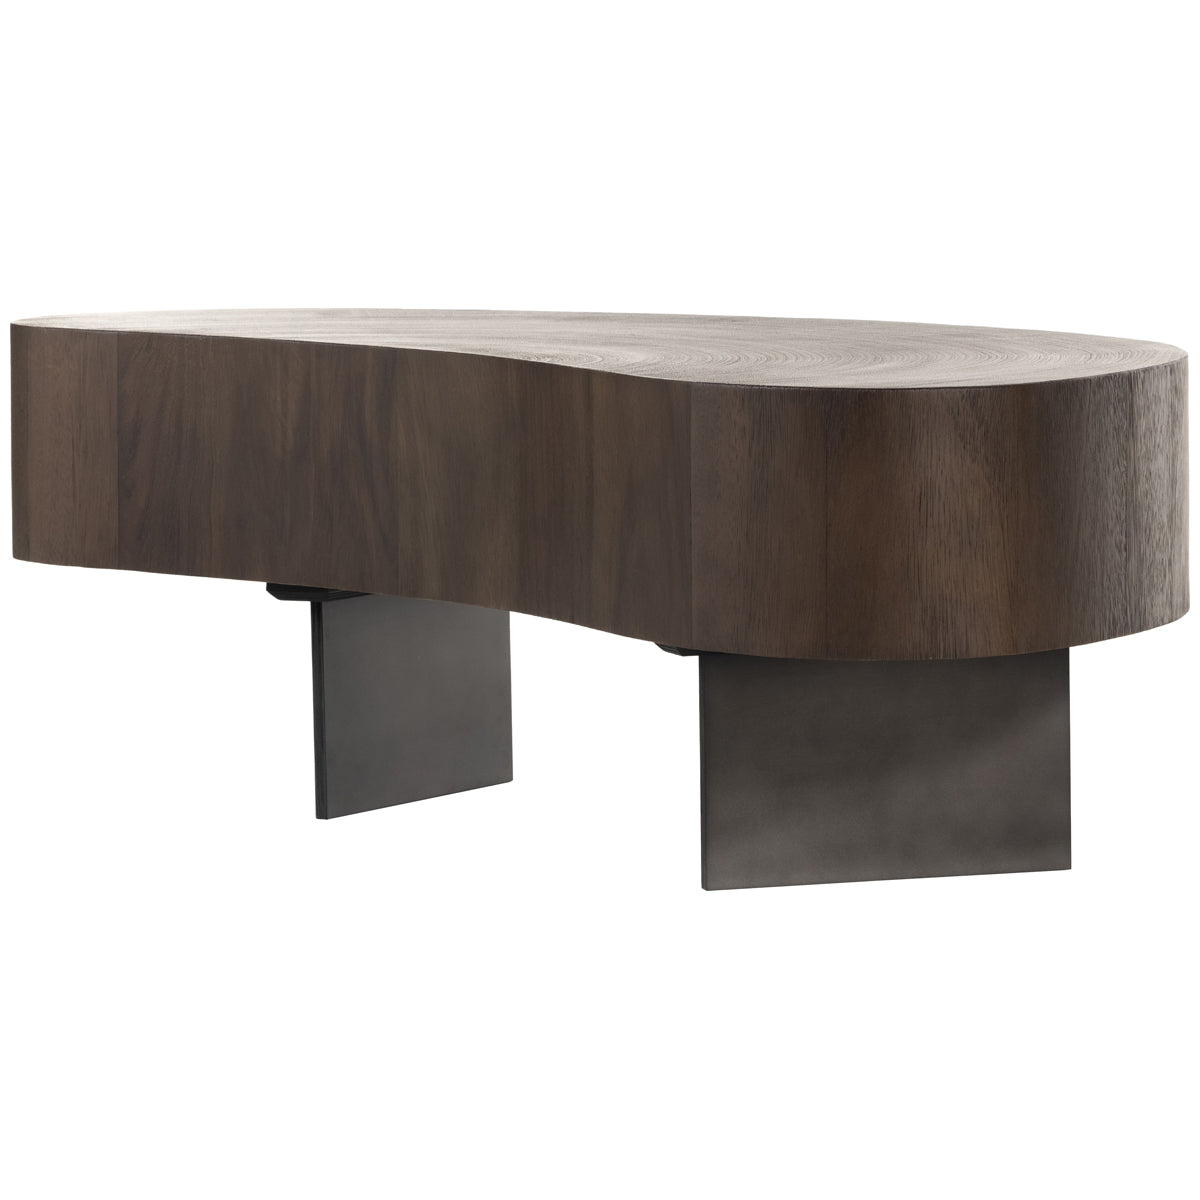 Four Hands Wesson Avett Coffee Table, Tall Piece